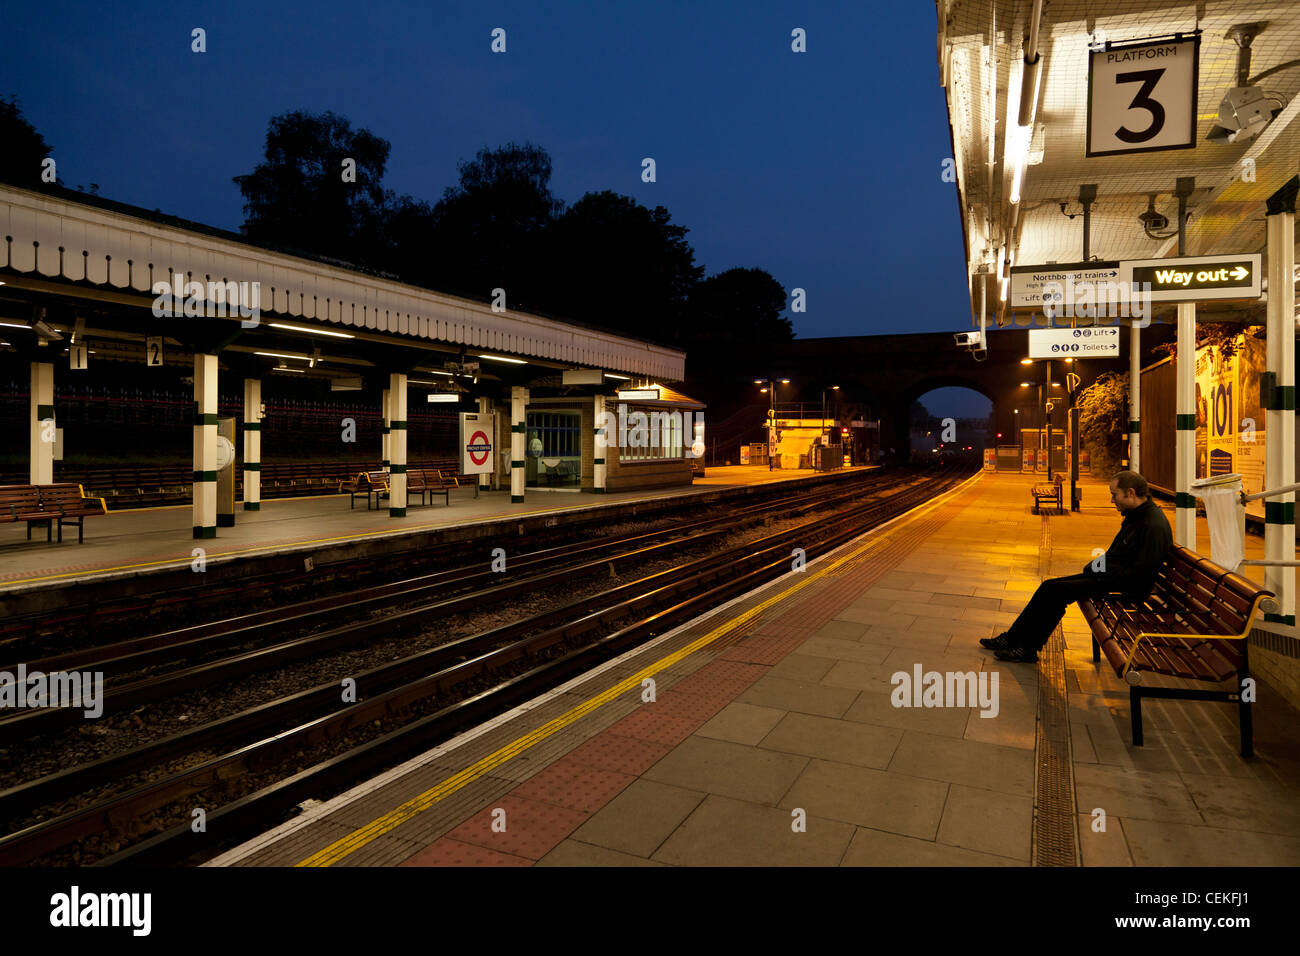 Finchley central tube station a 5.30 southbound Foto Stock